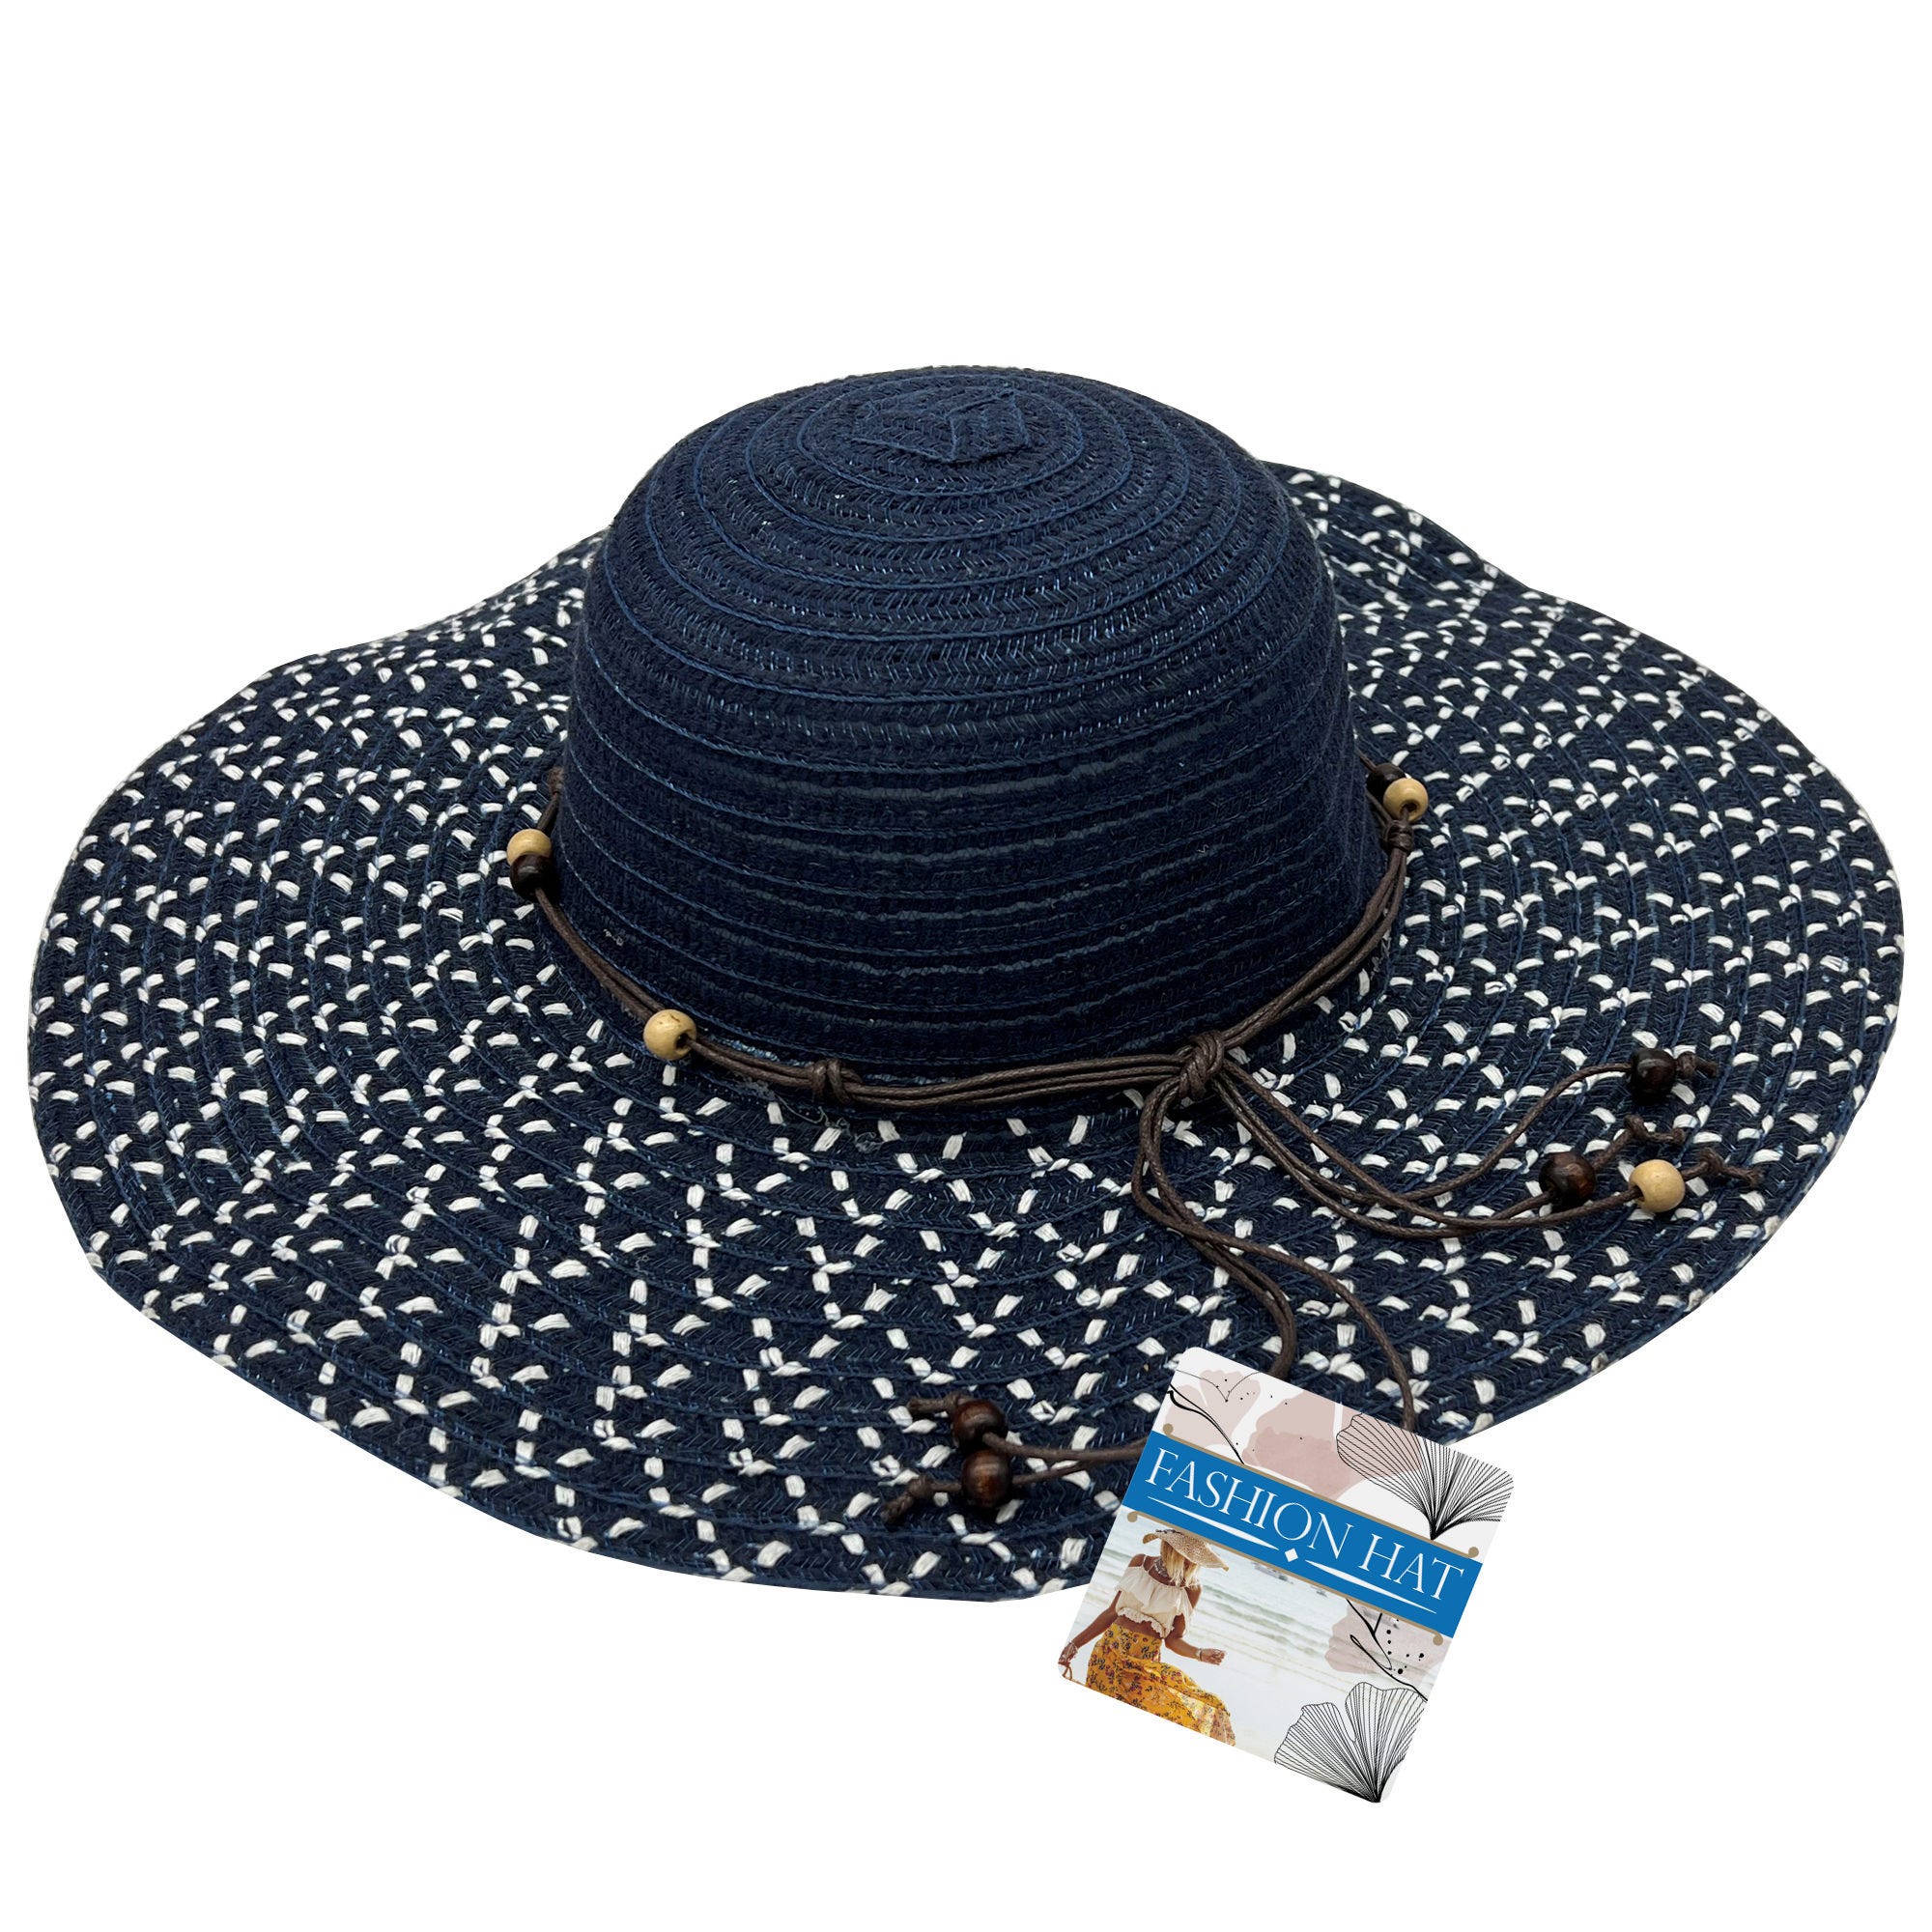 Adult Fashion Woven Sun HAT with Beads and Chin Strap - Qty 10